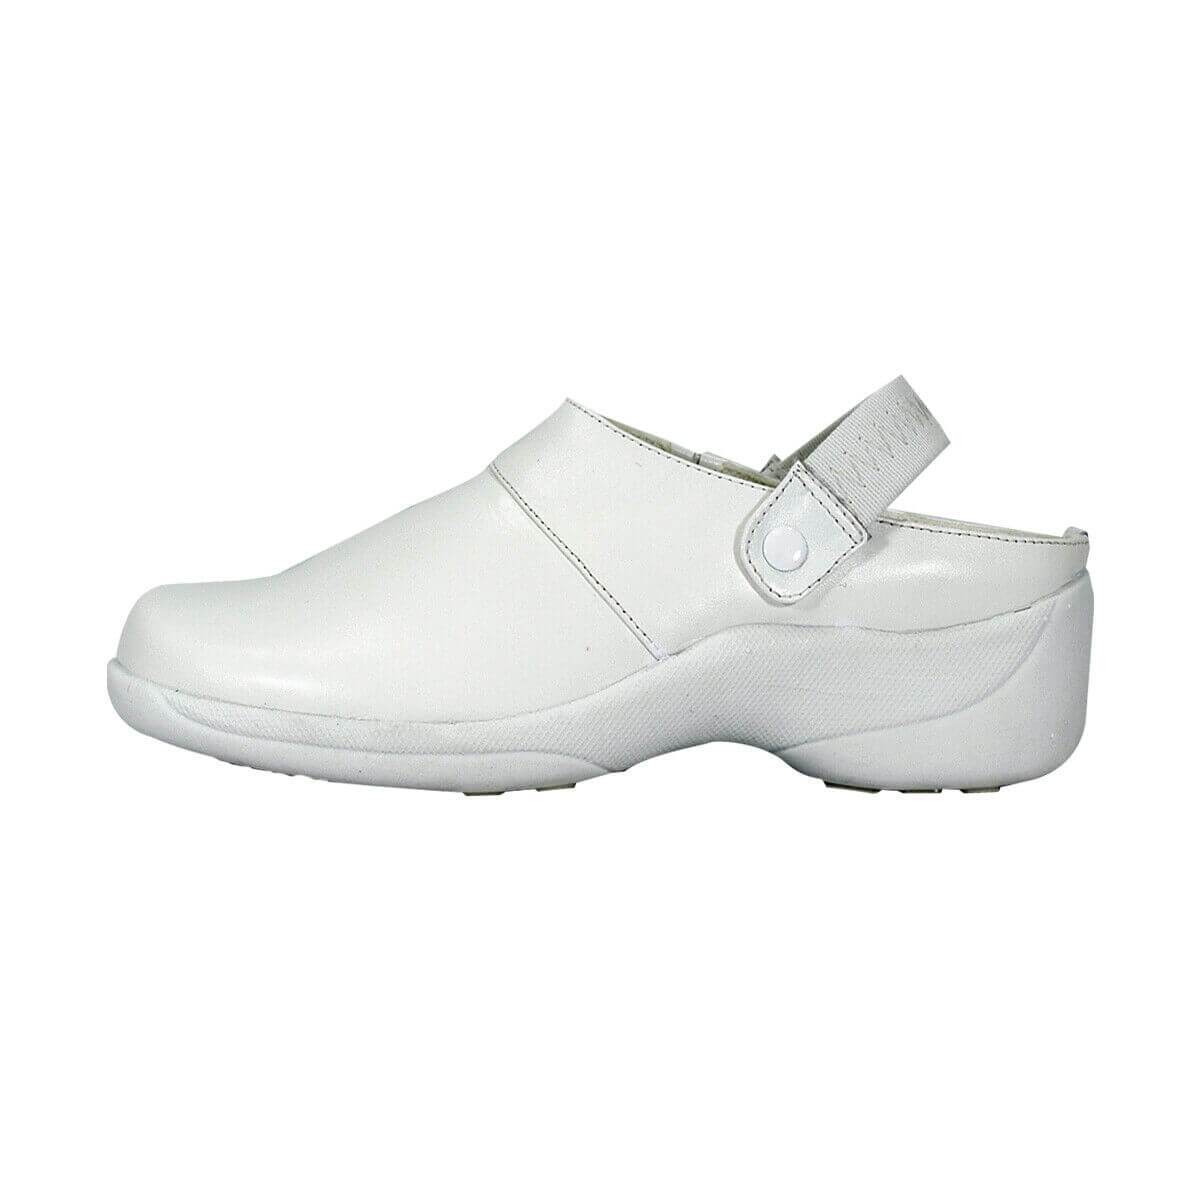 24 HOUR COMFORT Callie Women's Wide Width Leather Clogs